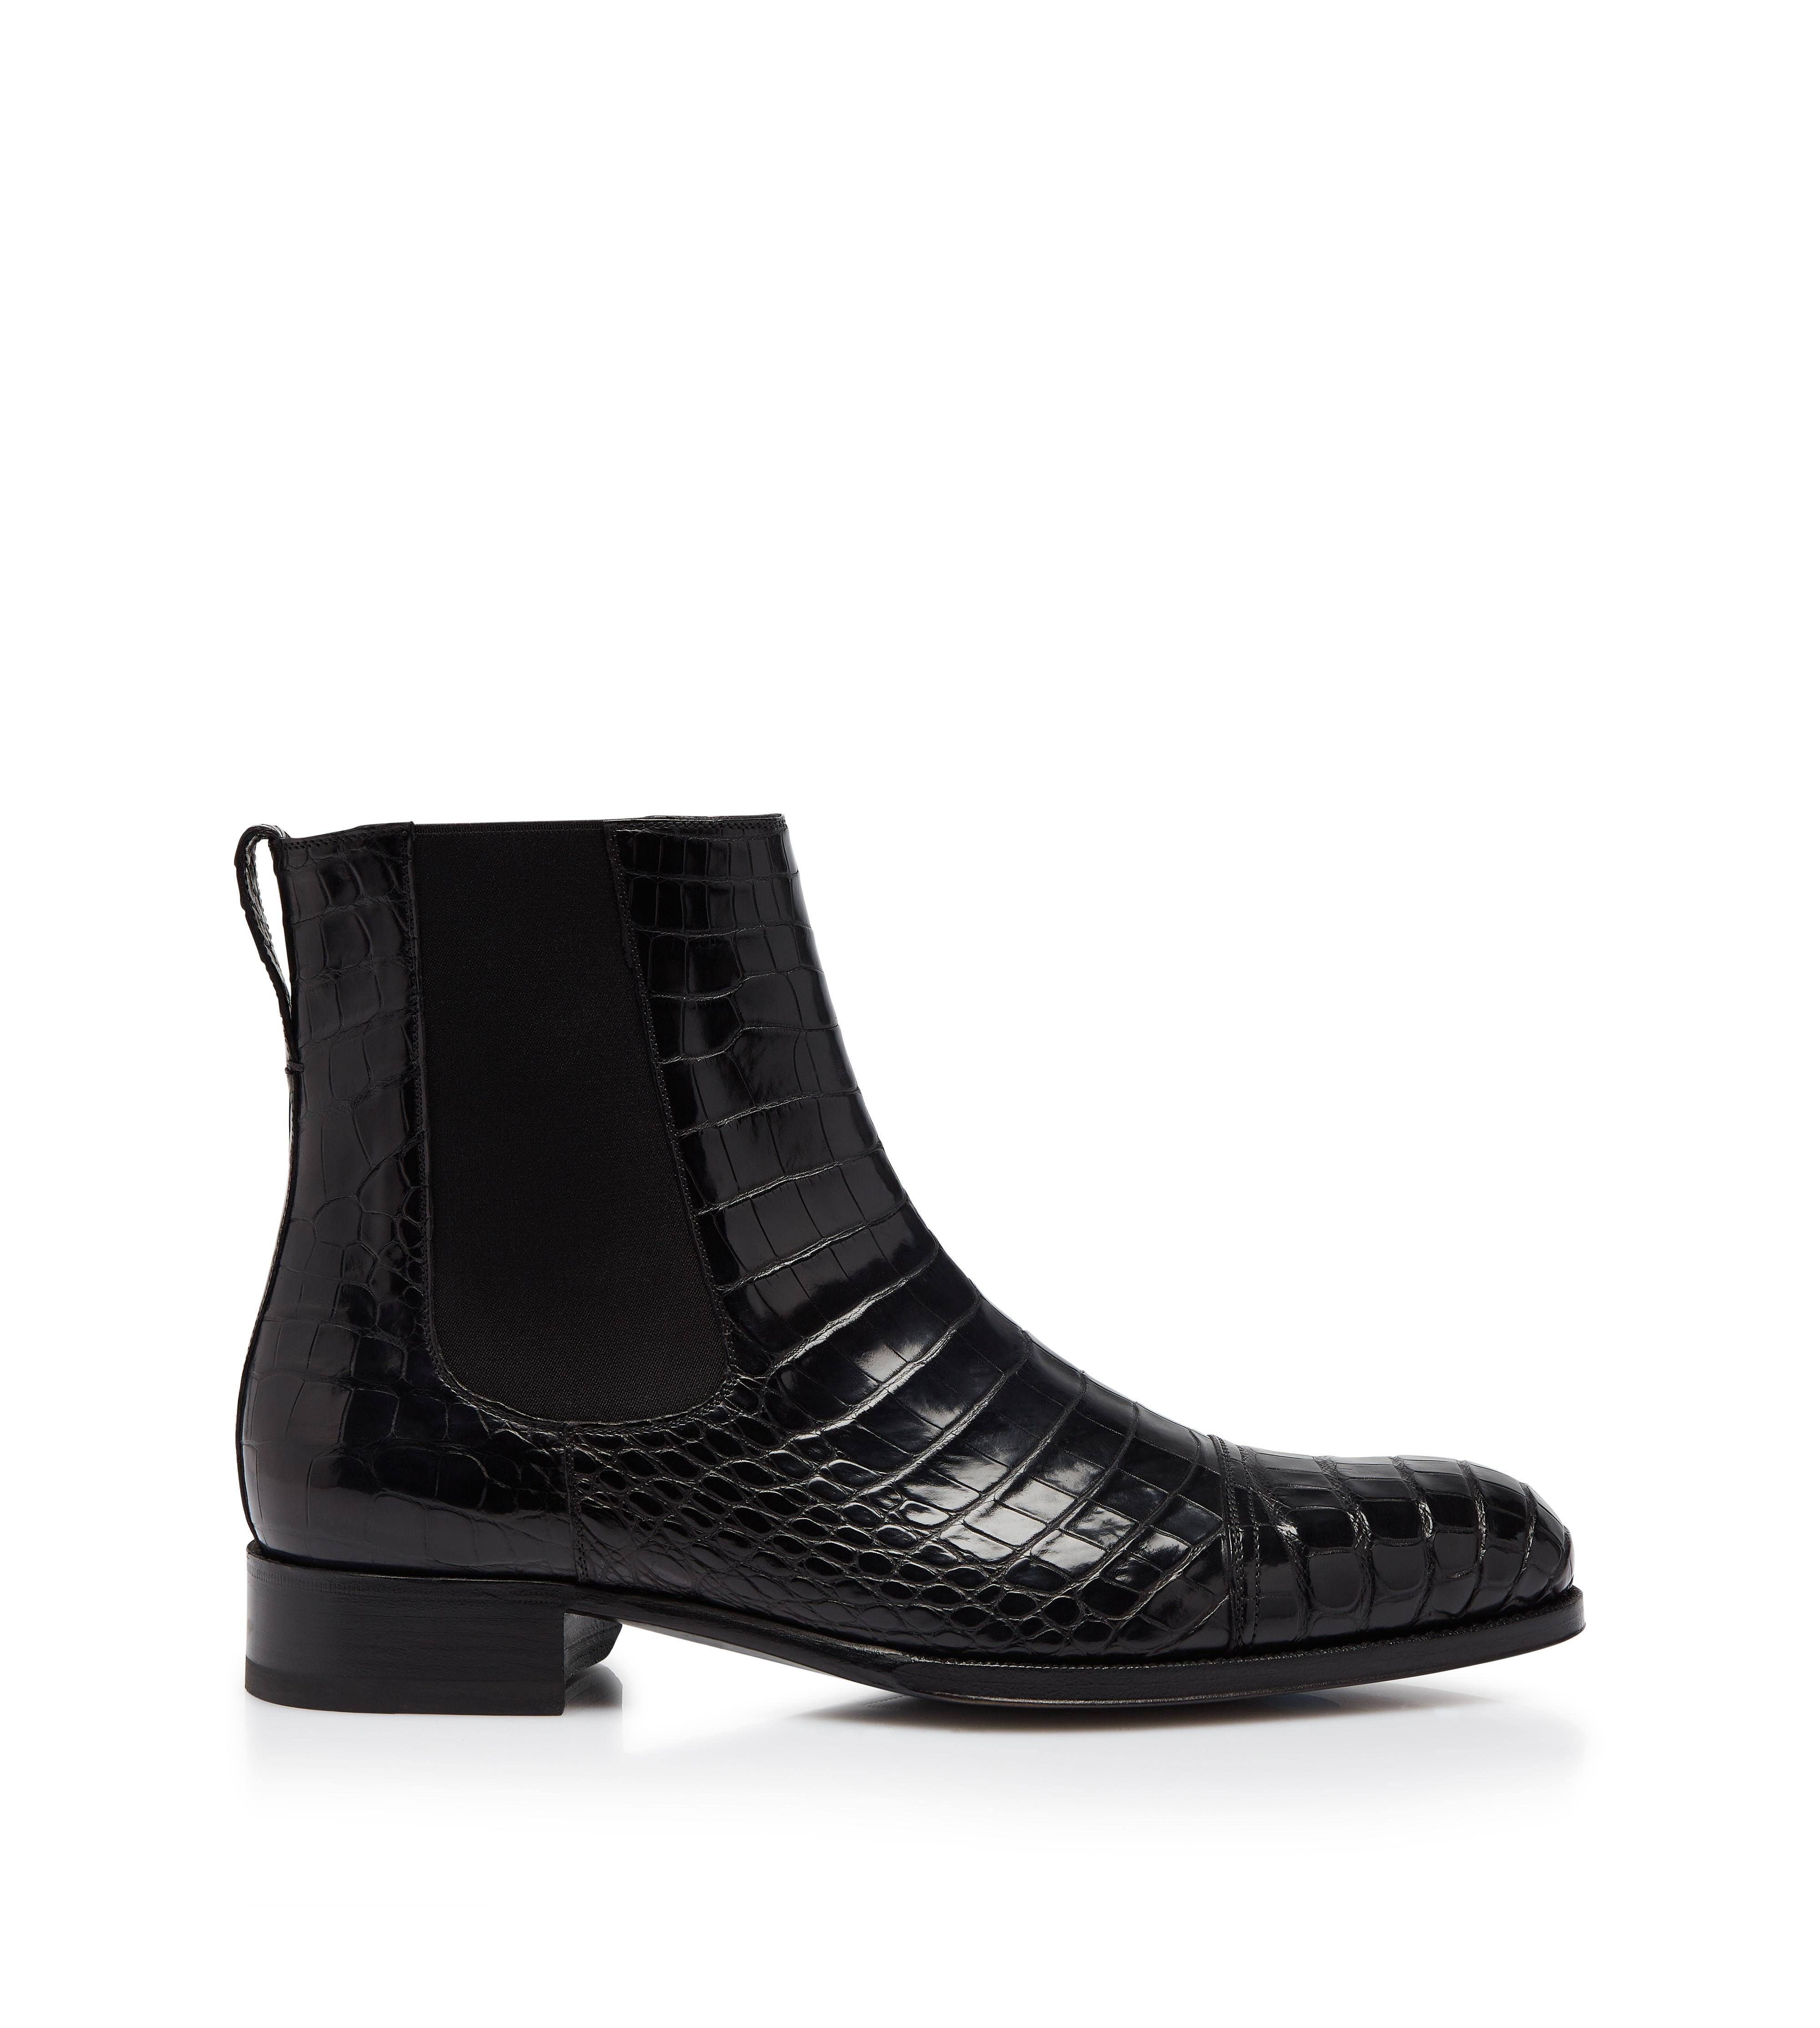 tom ford boots uk